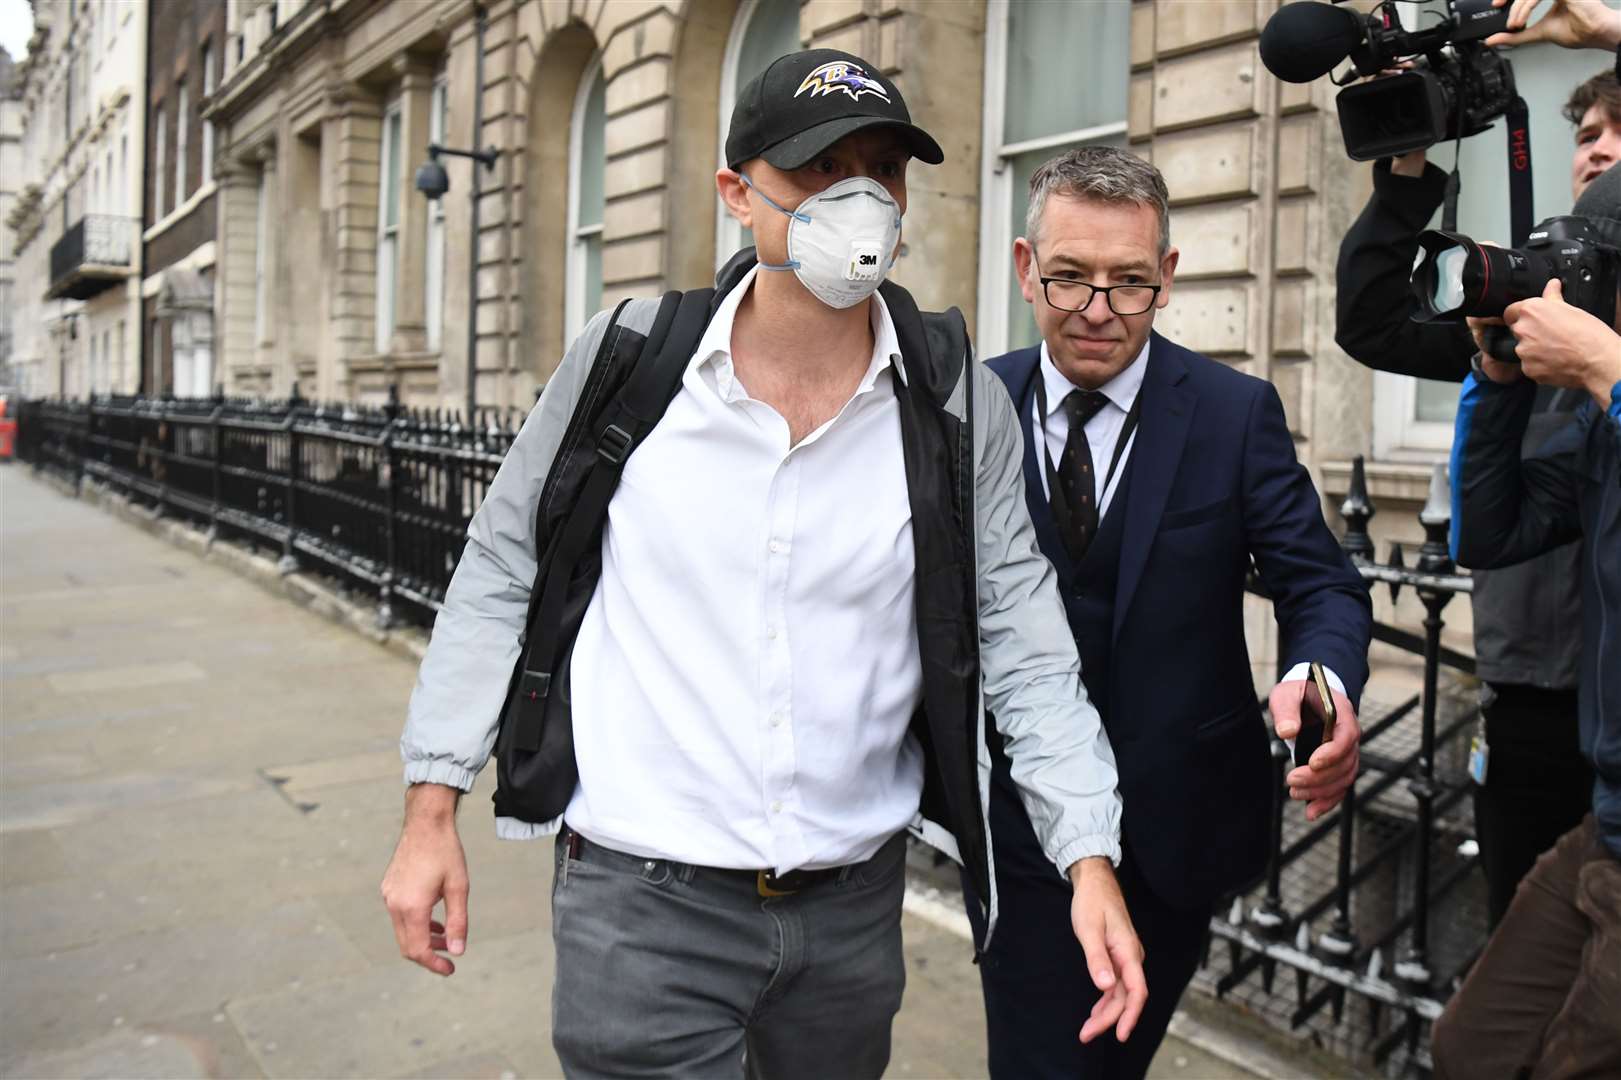 Dominic Cummings (left), former chief adviser to Prime Minister Boris Johnson, arriving at Portcullis House, central London, to give evidence (Kirsty O’Connor/PA)